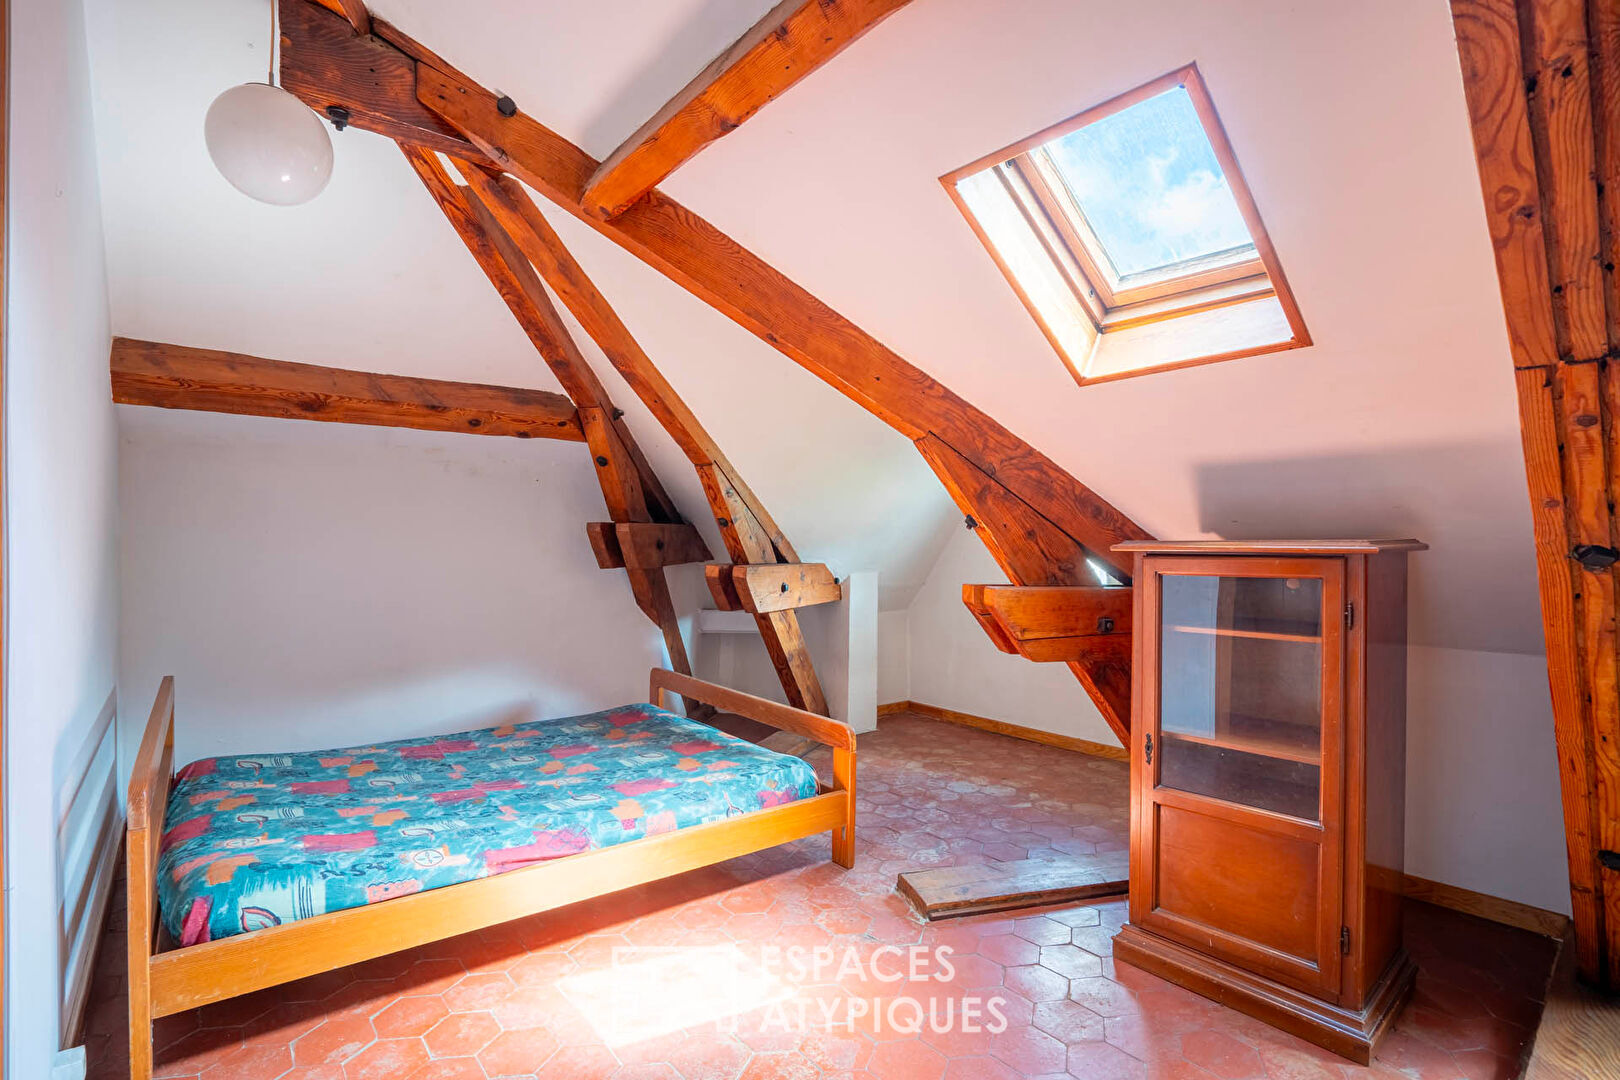 Attic apartment with open view